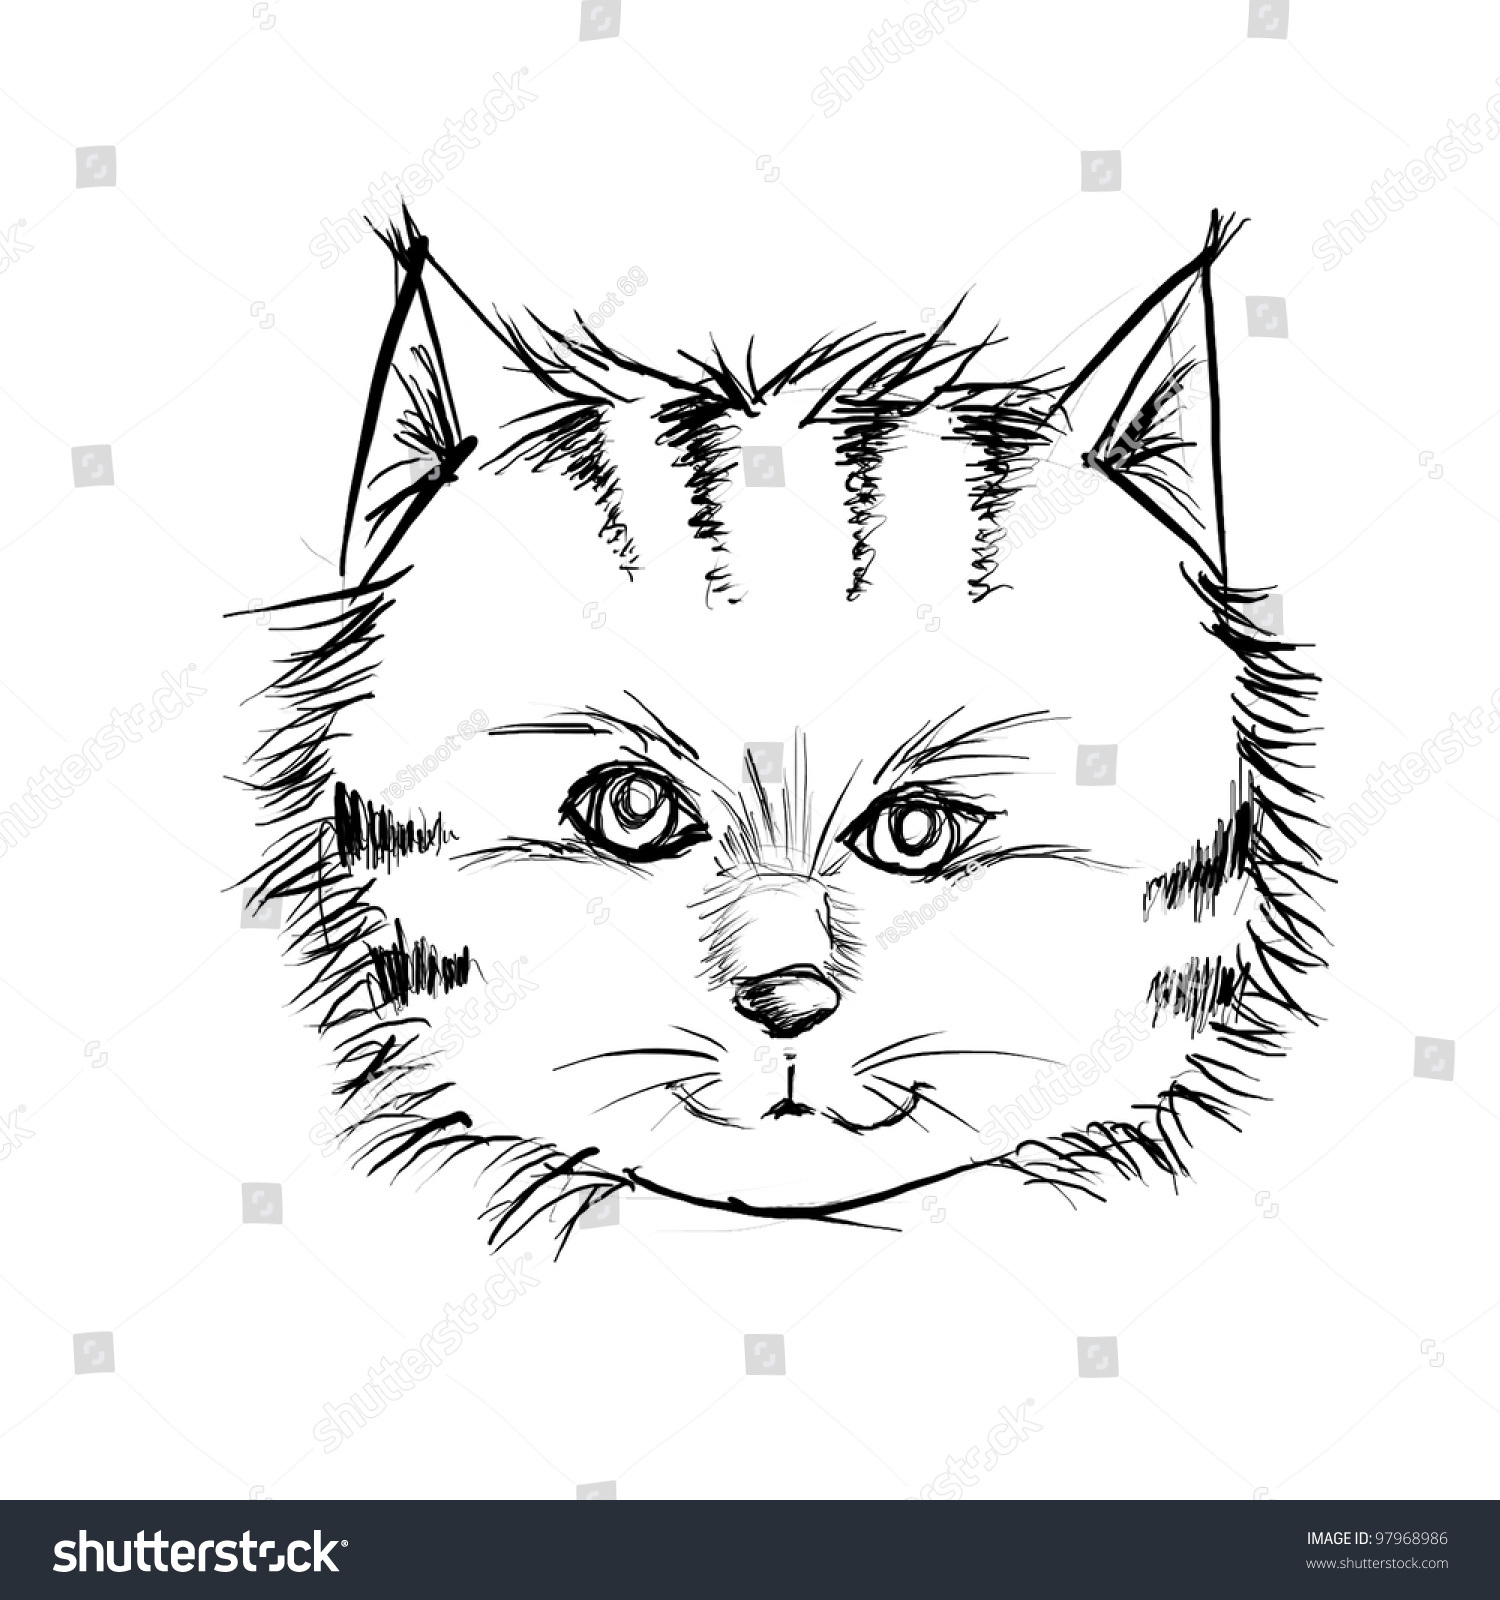 Cat Face In Drawing Stock Photo 97968986 : Shutterstock